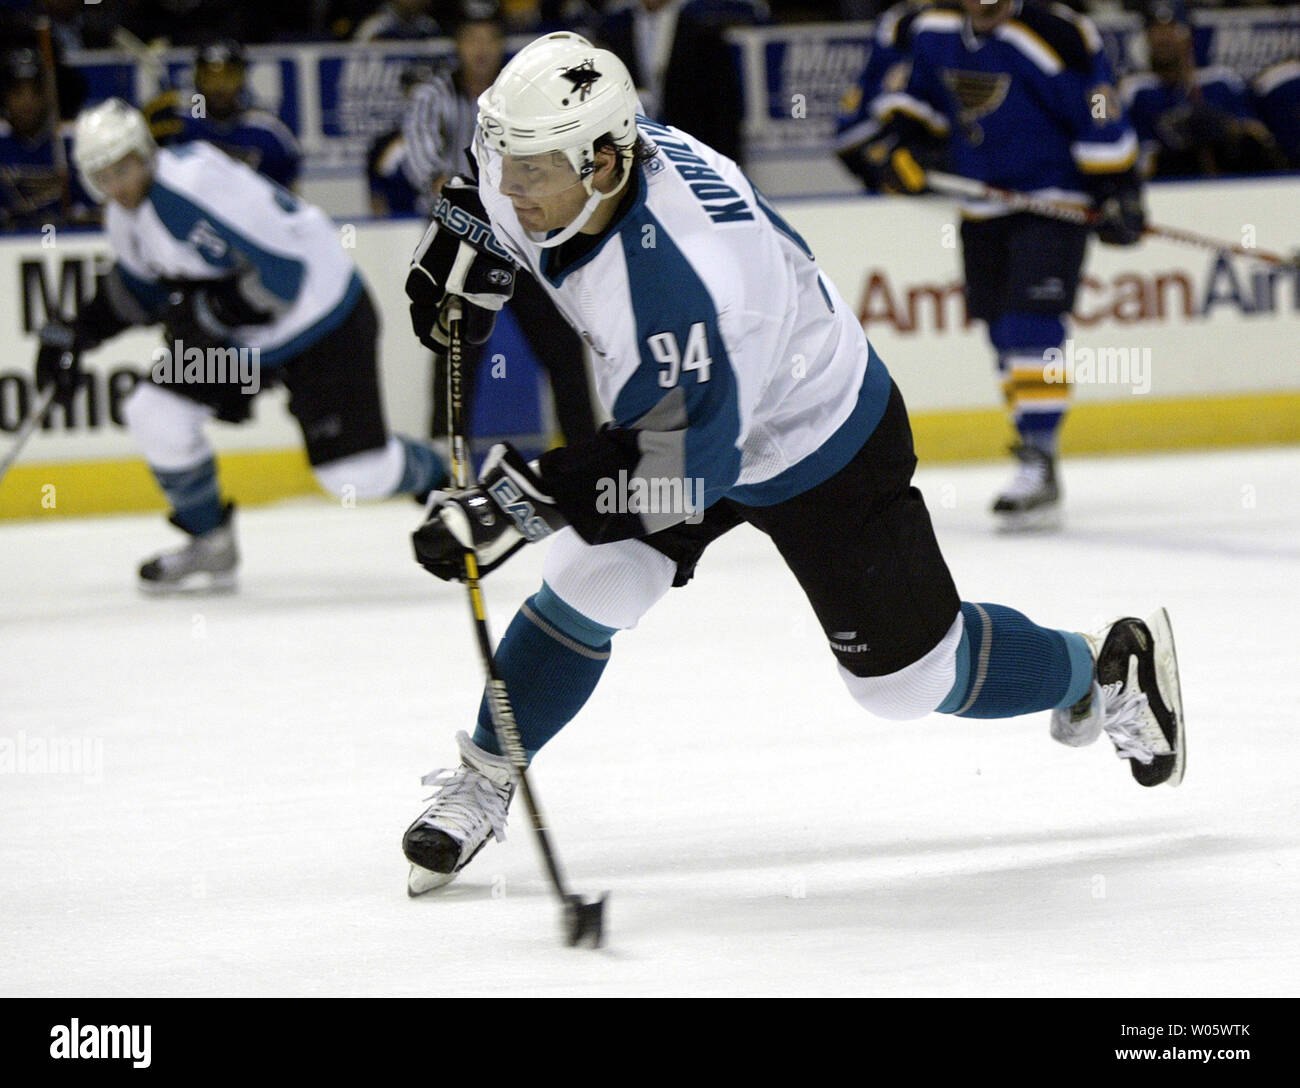 san-jose-sharks-alexander-korolyuk-winds-up-and-shoots-the-puck-against-the-st-louis-blues-during-the-first-period-of-their-stanley-cup-quarterfinals-game-at-the-savvis-center-in-st-louis-on-april-12-2004-upi-photobill-greenblatt-W05WTK.jpg